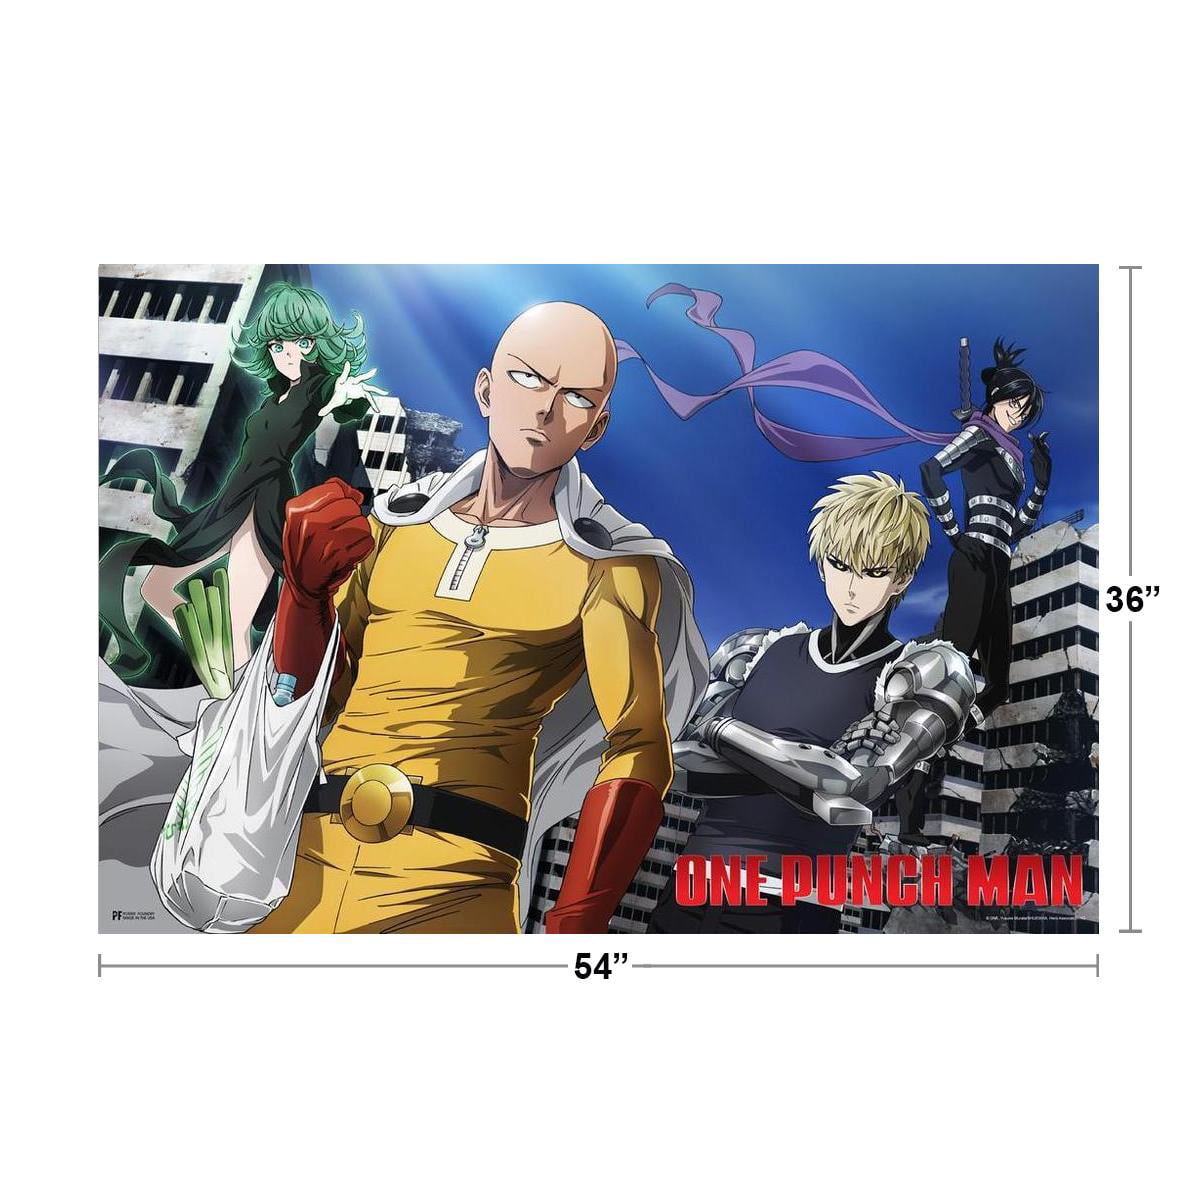  One Punch Man Anime Poster Speed O' Sound Sonic Cool Aesthetic  Modern Wall Decor Art Graphic Print Picture Japanese Bedroom Home Living  Room Anime Fan Cool Wall Decor Art Print Poster